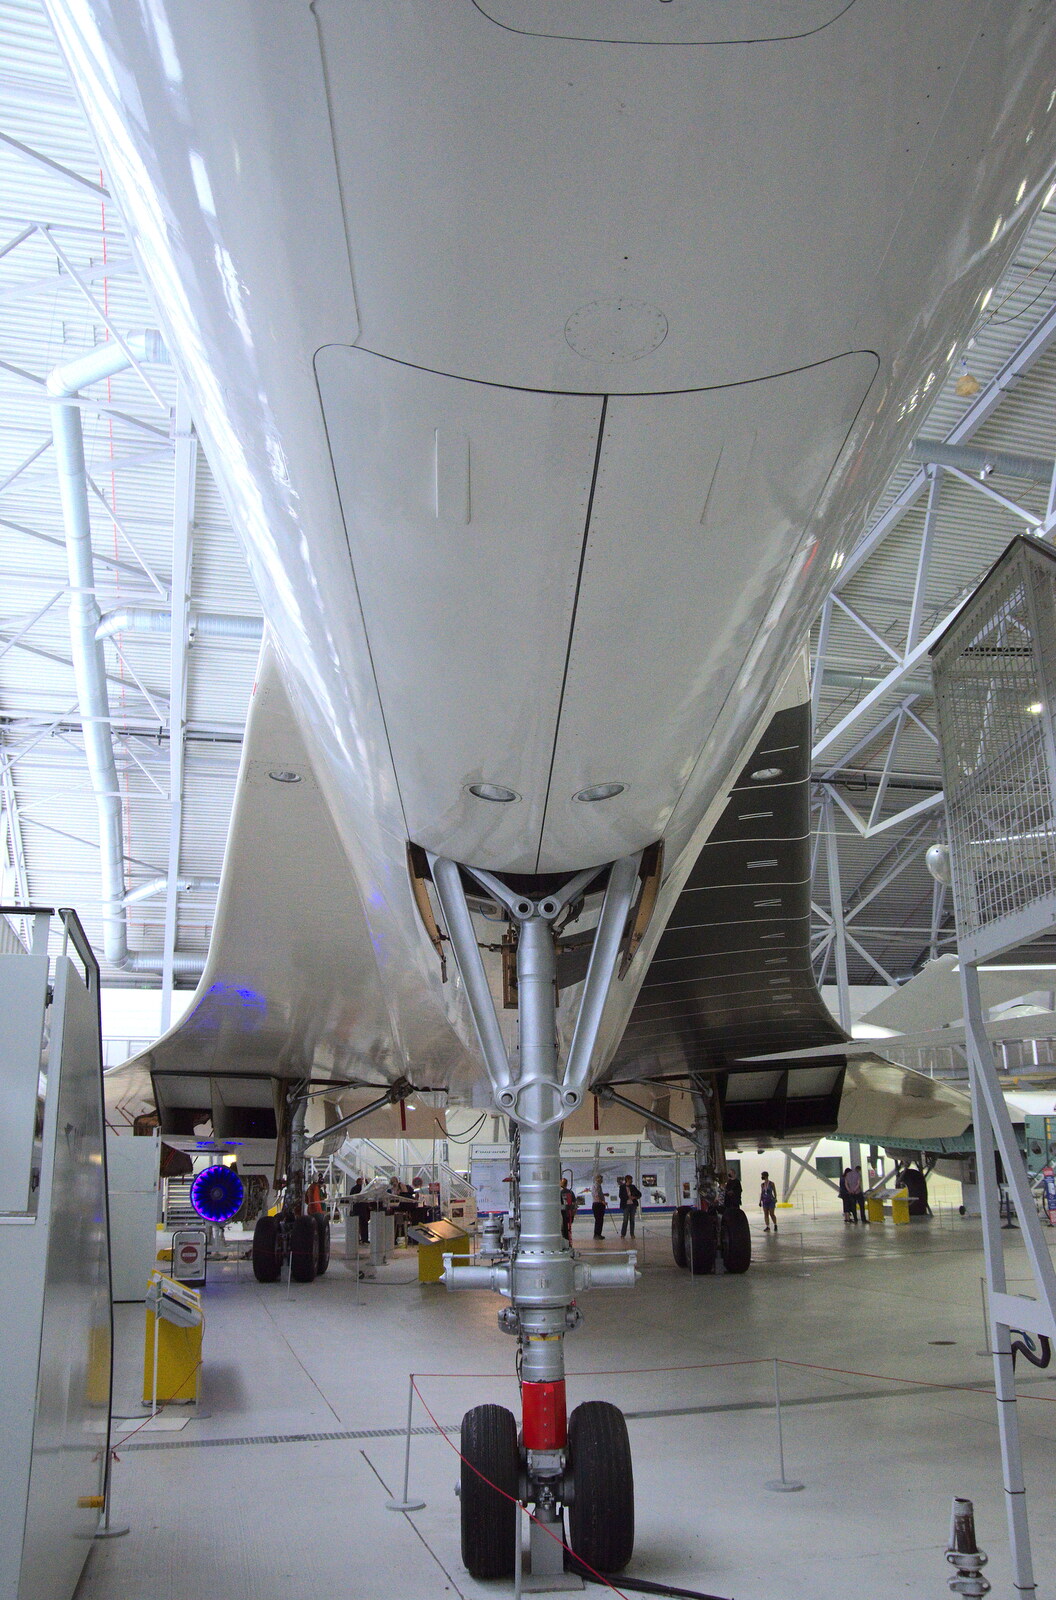 Concorde's belly and nosewheel from The Duxford Dash, IWM Duxford, Cambridge - 13th September 2020